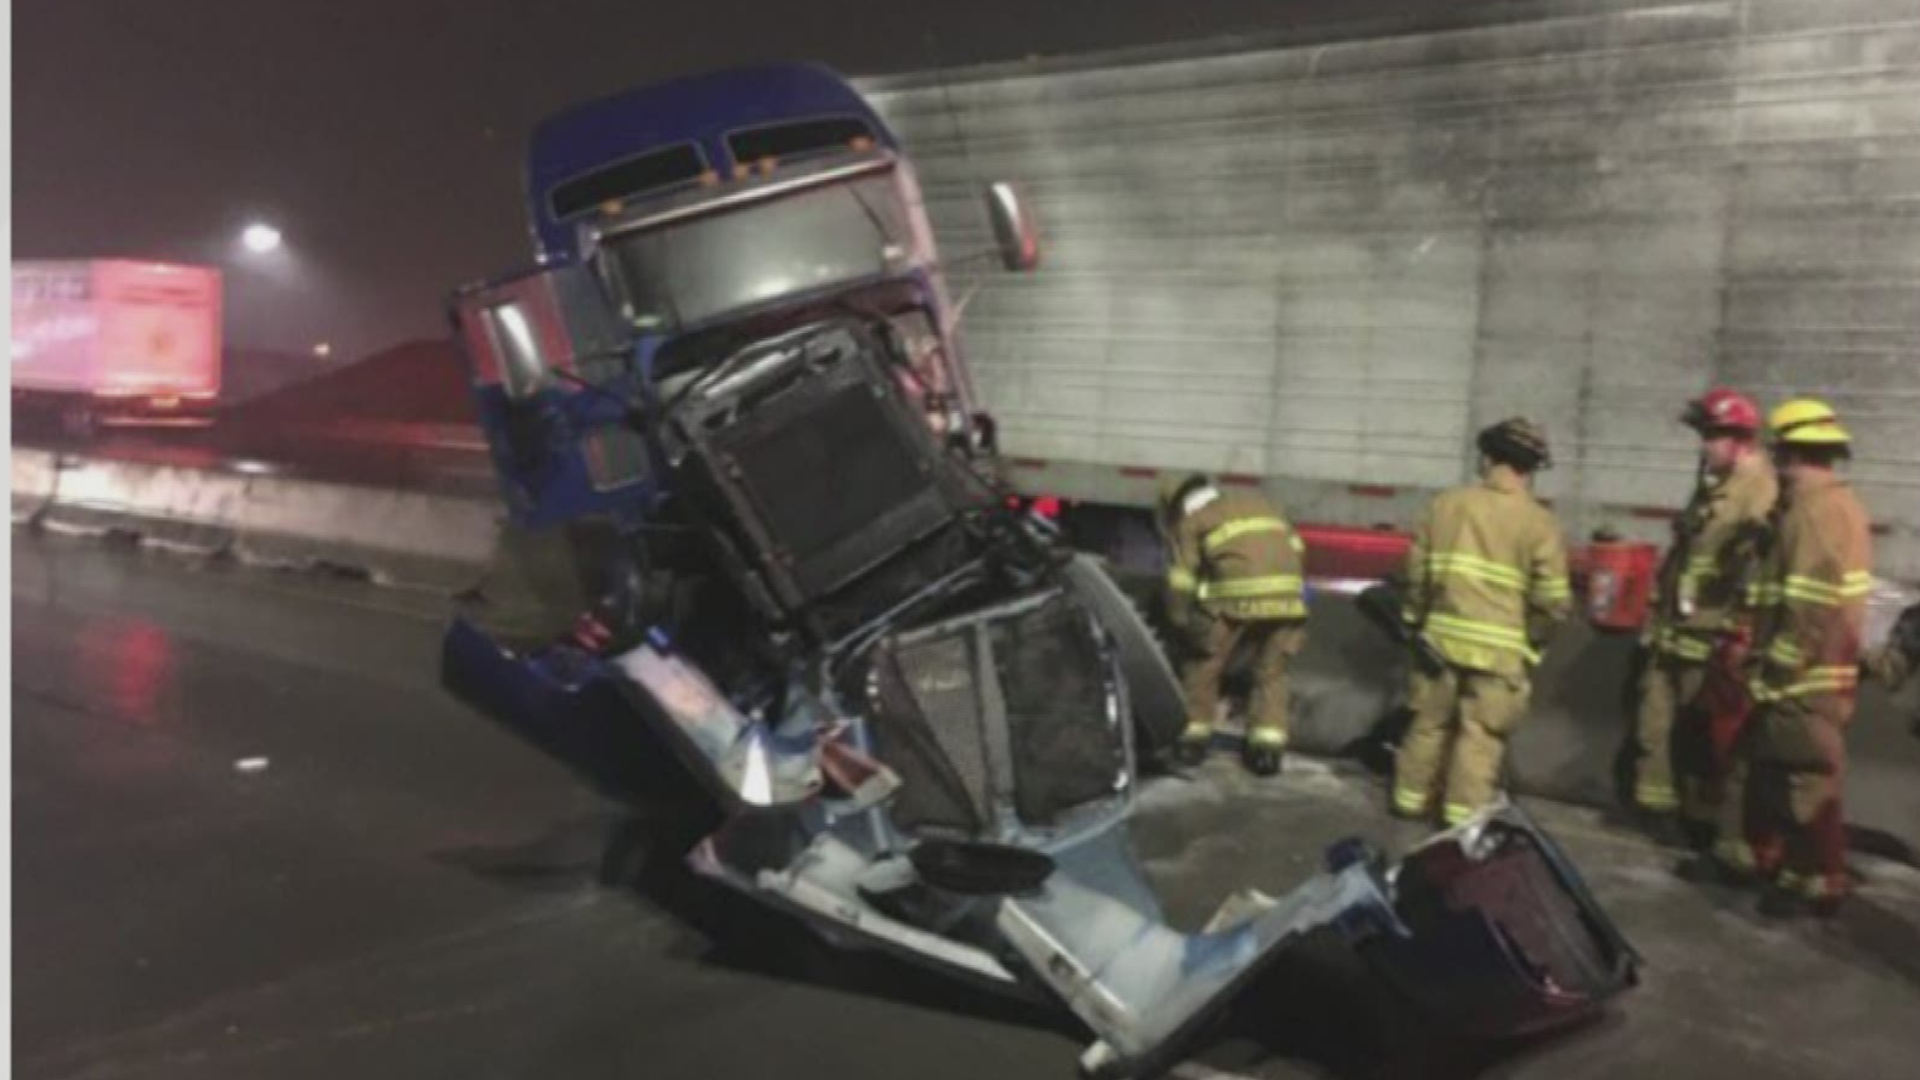 The truck slammed into a jersey barrier, doing significant damage to the cab.